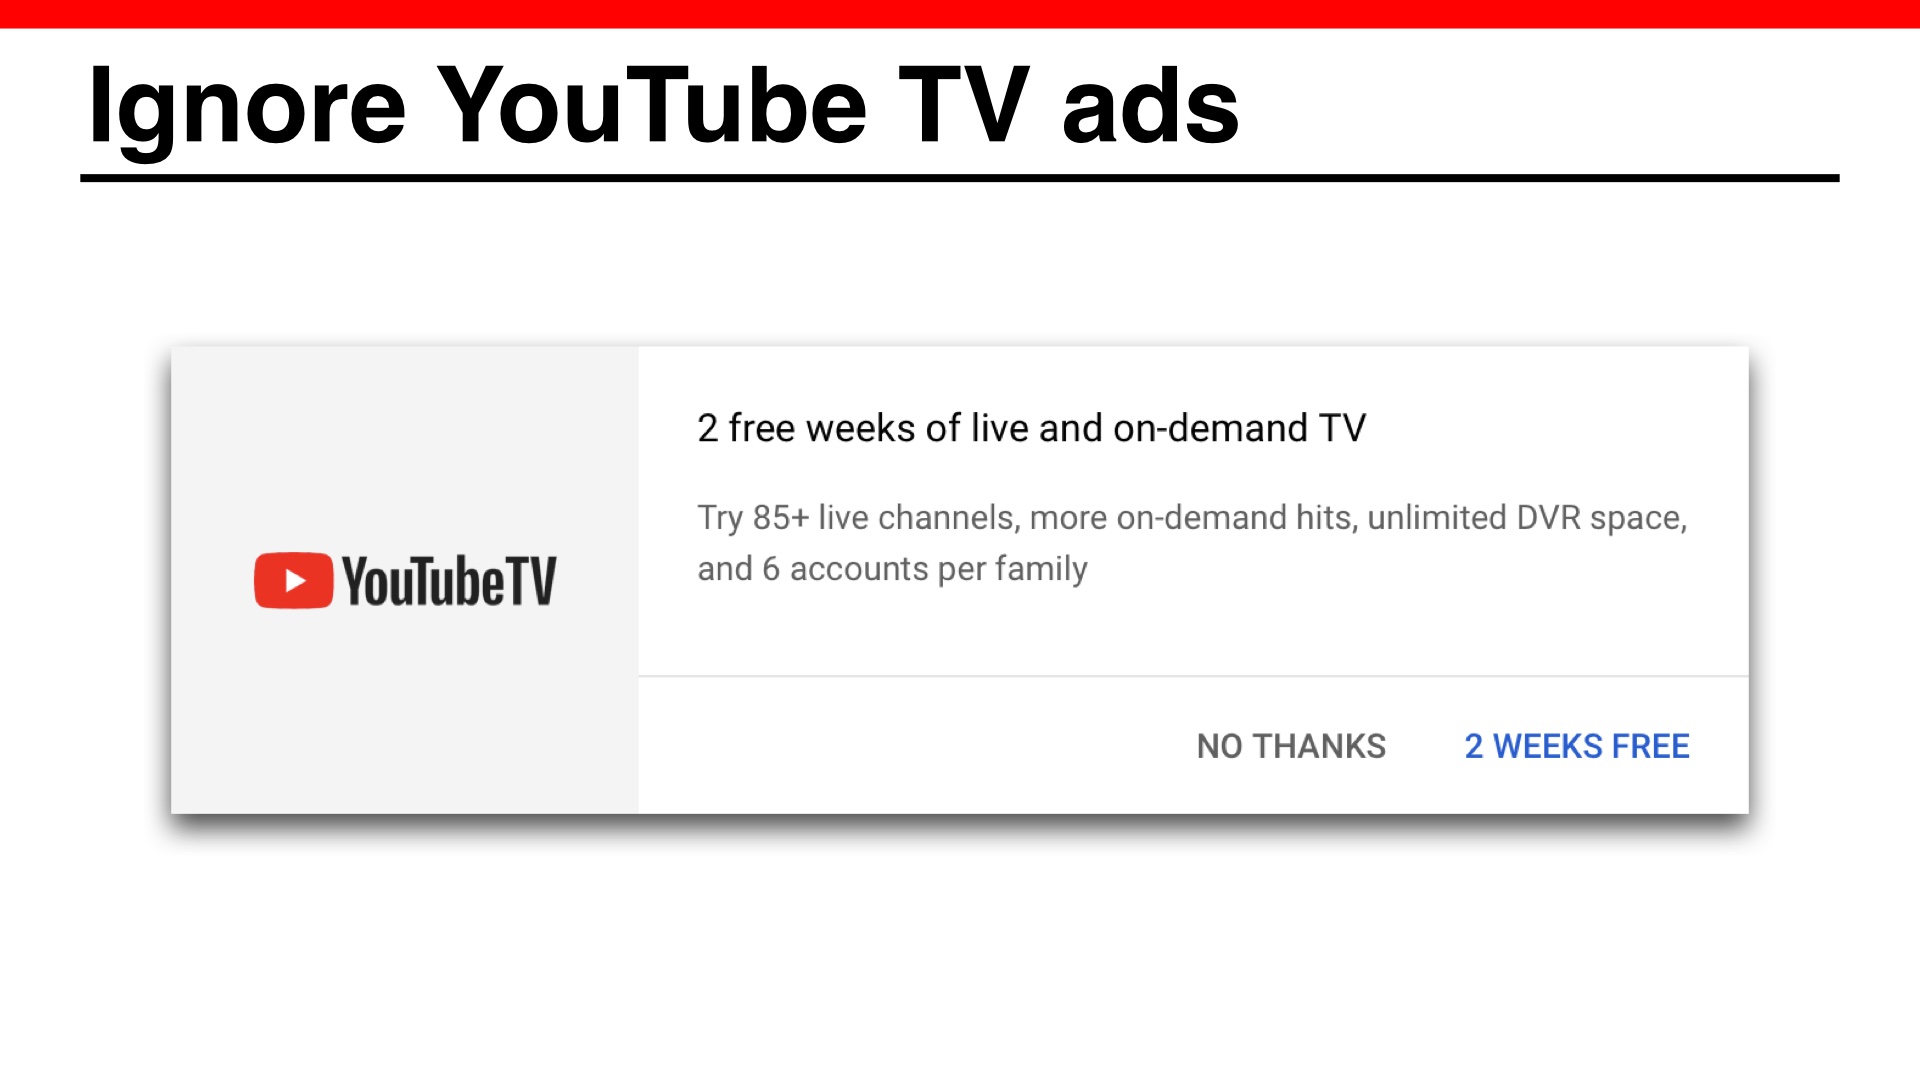 Ignore YouTube ads, slide explains that YouTube TV is just a thing YouTube is relentlessly pushing and not part of this. Image is a screenshot of one of those ads